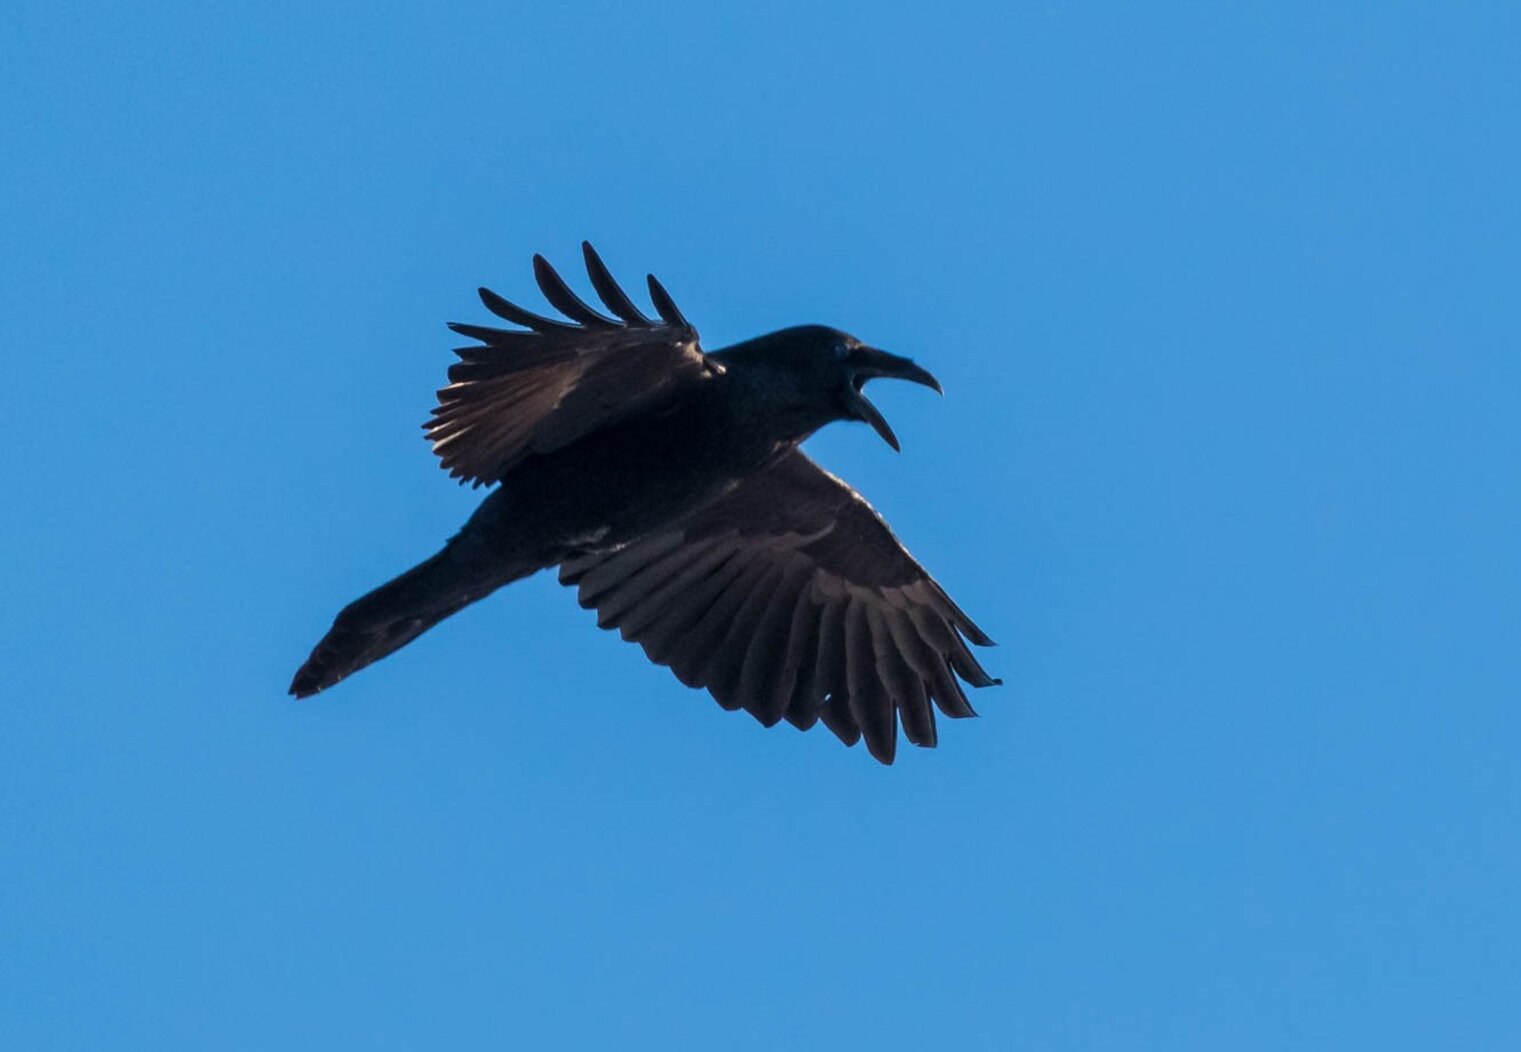 Common Ravens have recently become year-round, nesting residents in New York City. Photo: Andrew Reding/CC BY-NC-ND 2.0